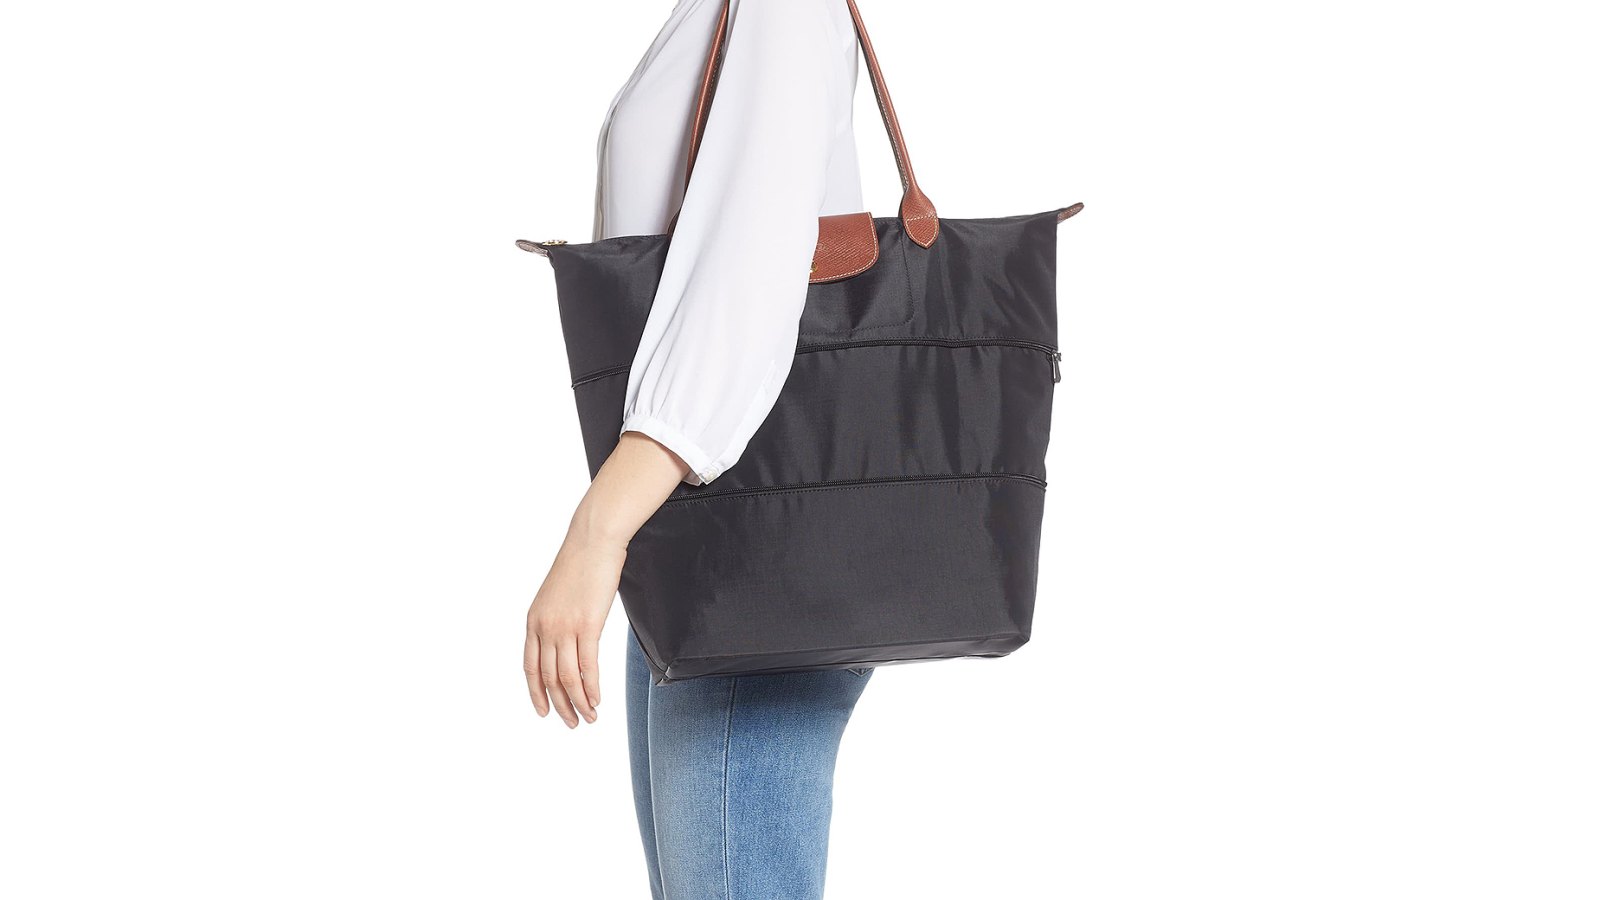 Longchamp Expandable Tote Is $75 Off in the Nordstrom Sale